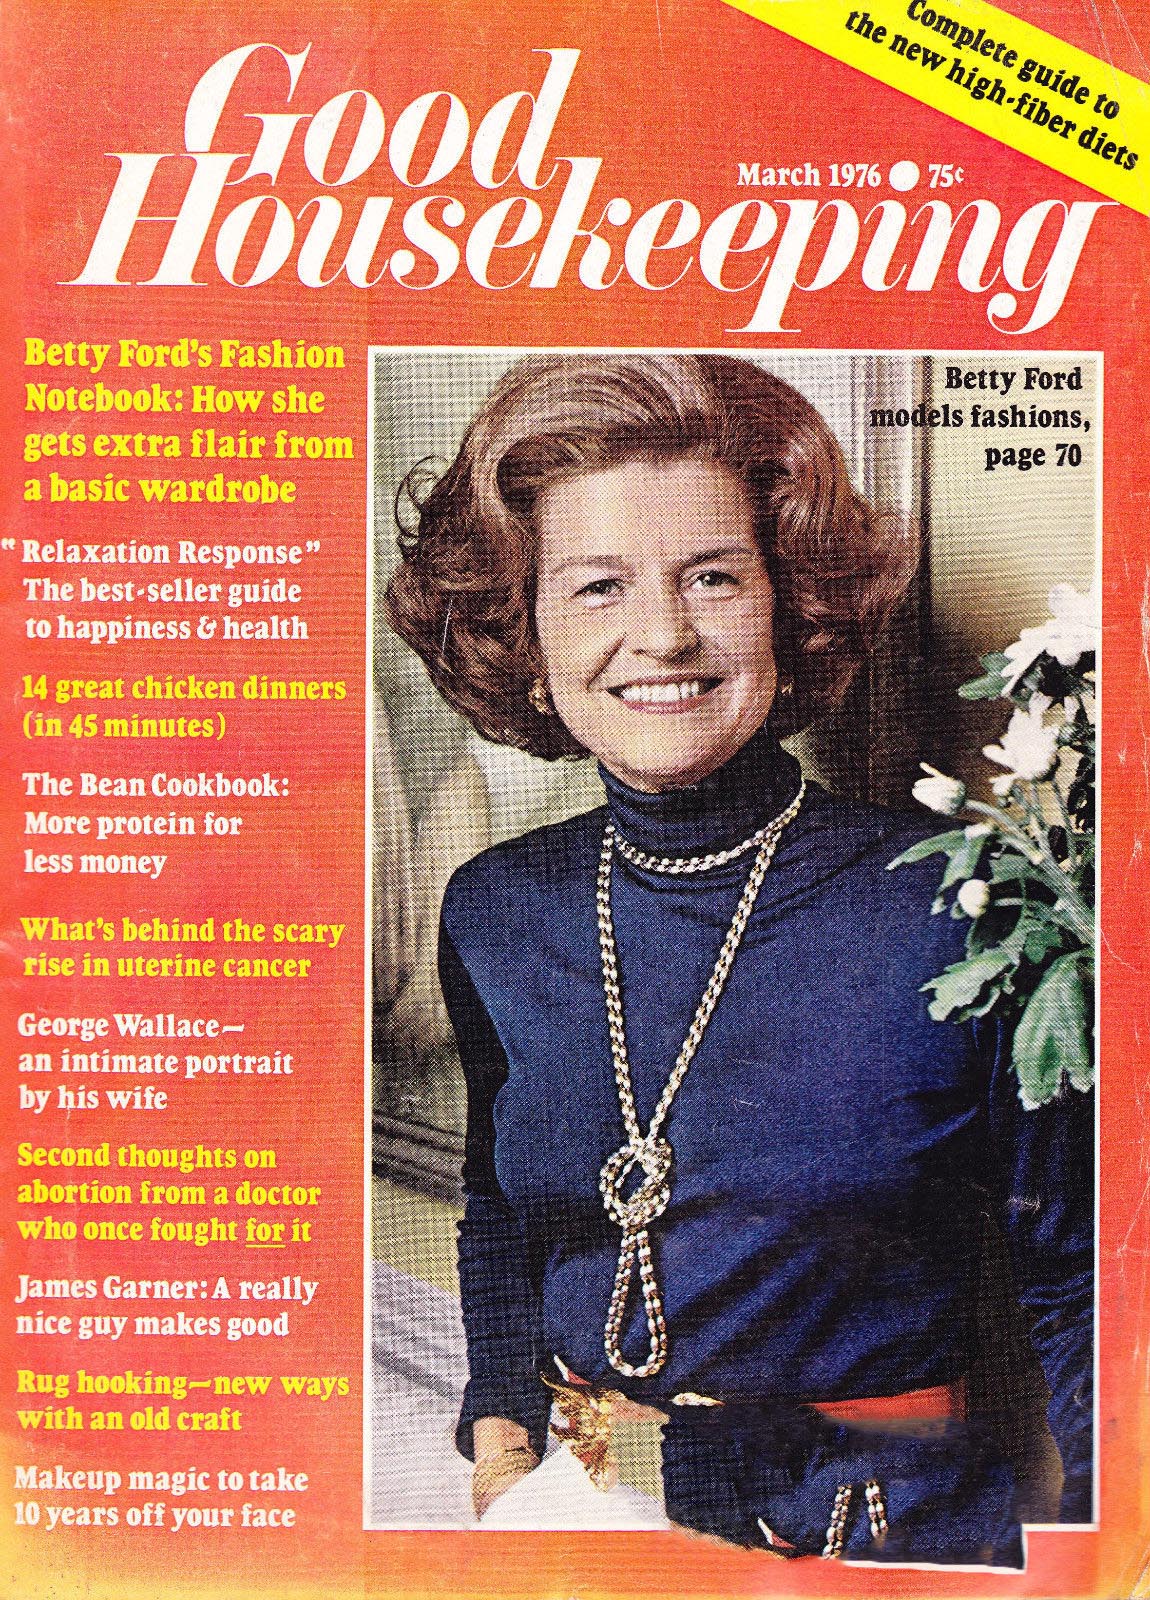 Good Housekeeping March 1976 magazine back issue Good Housekeeping magizine back copy Good Housekeeping March 1976 American womens magazine Back Issue Published by Hearst Publishing Corporation. Betty Ford's Fashion Notebook: How She Gets Extra Flair From A Basic Wardrobe .